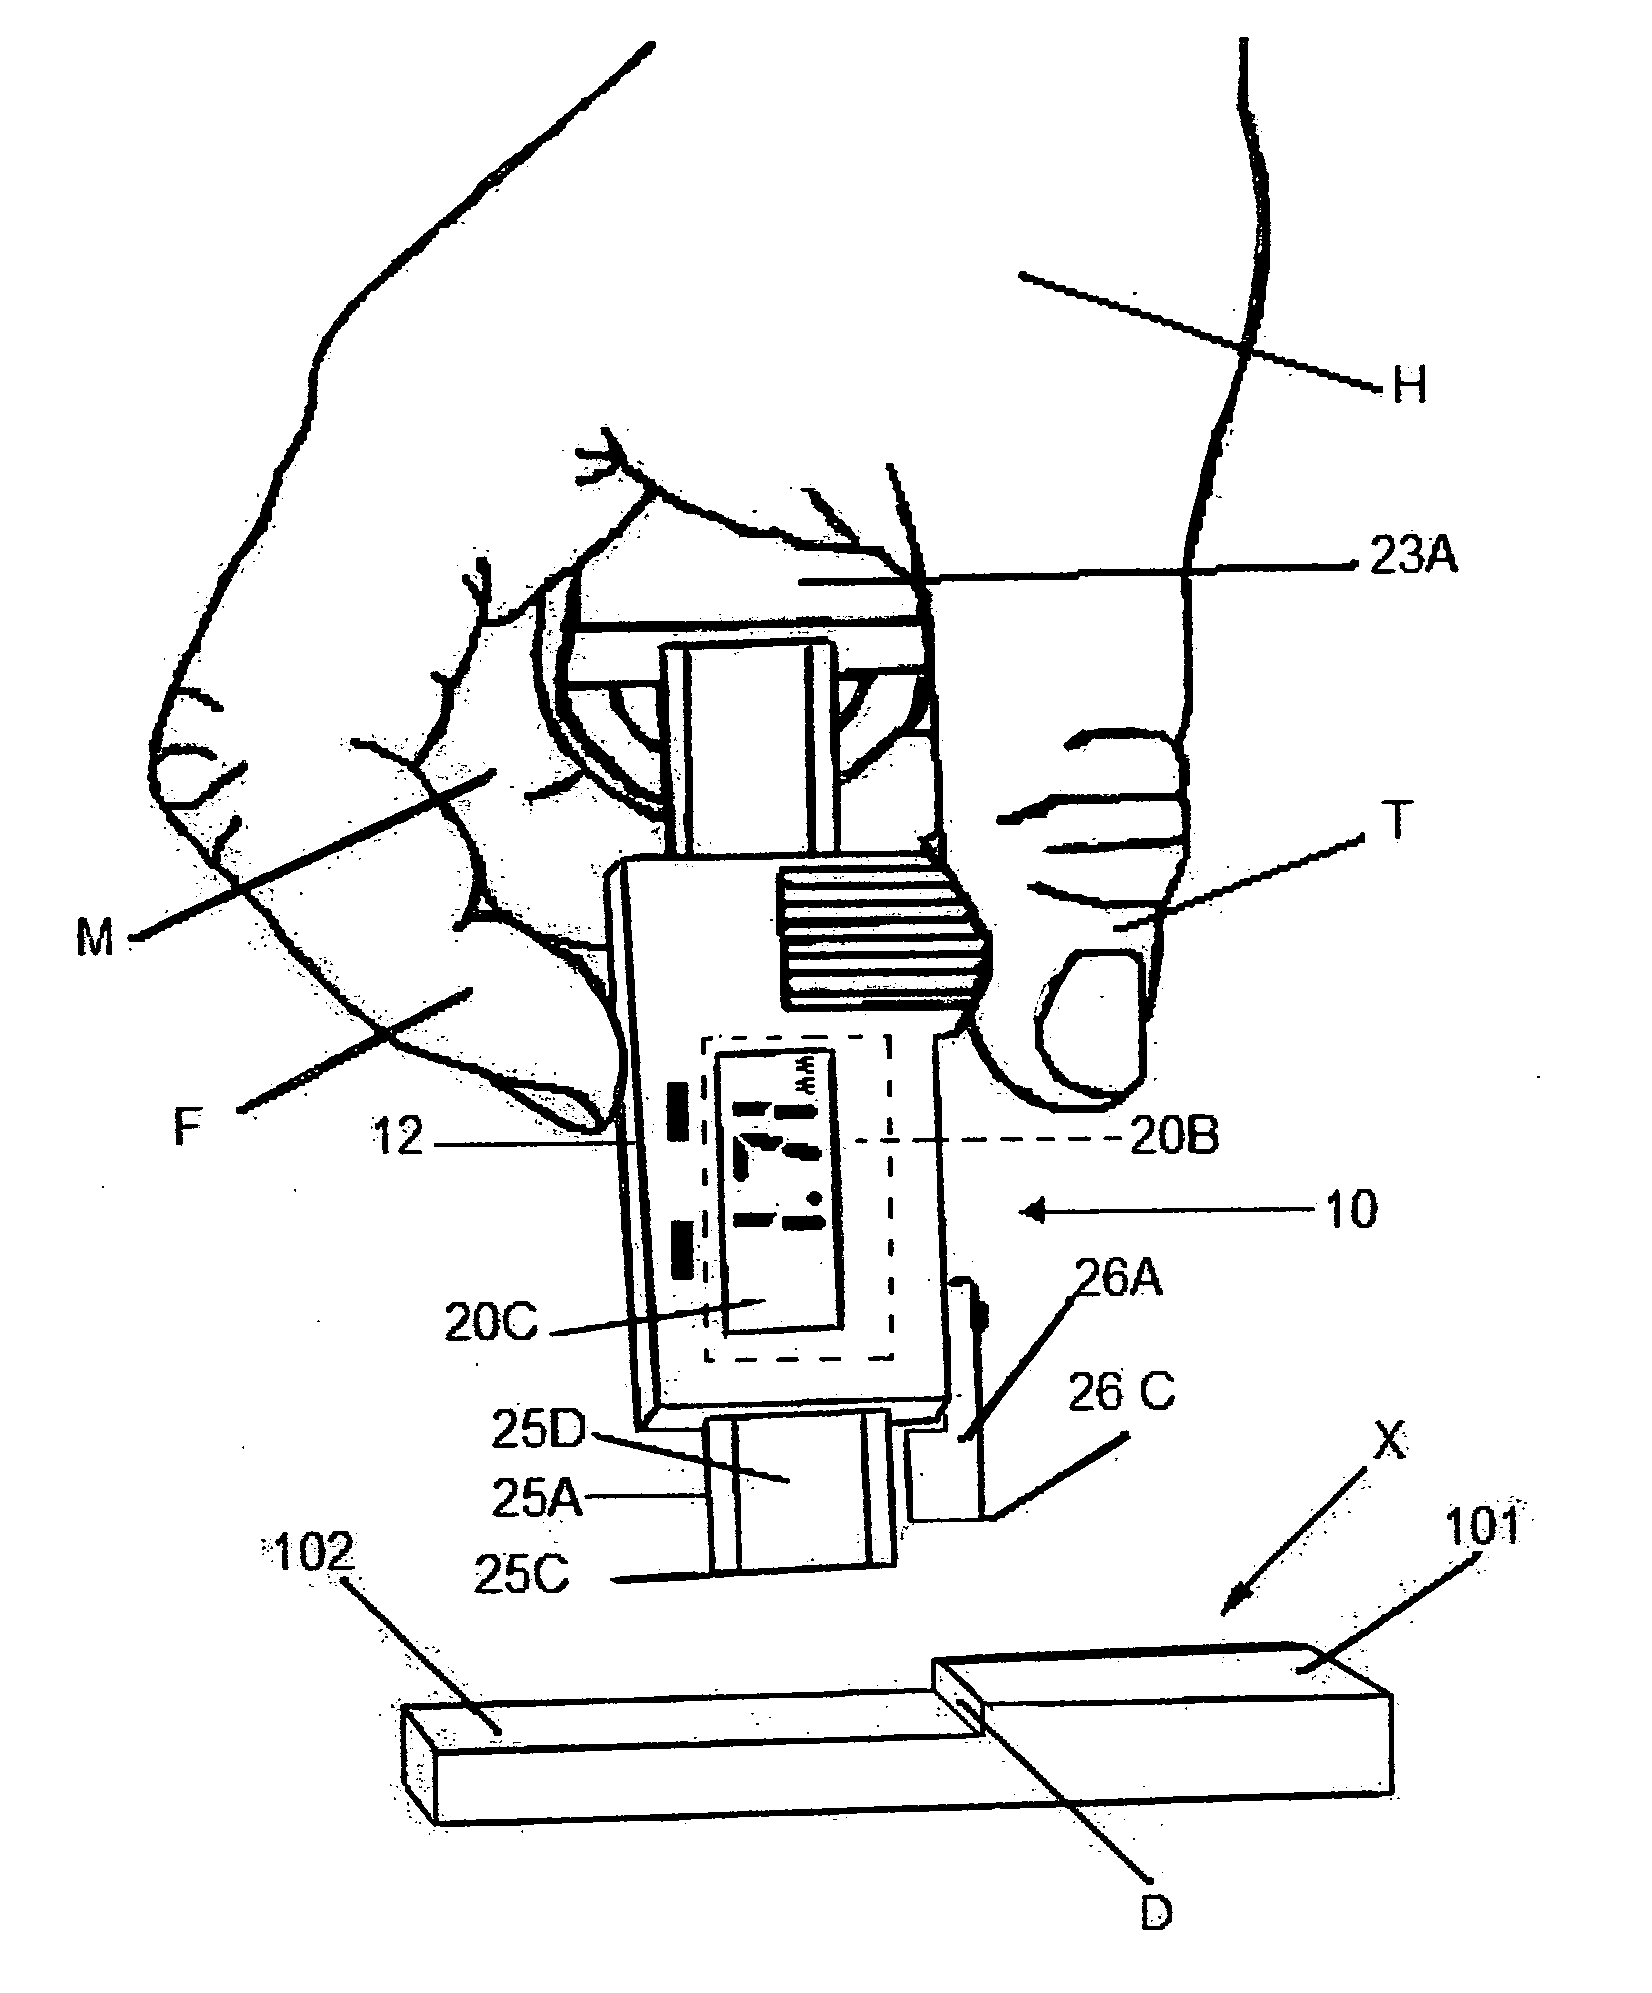 Apparatus for measuring step height or depth against another surface